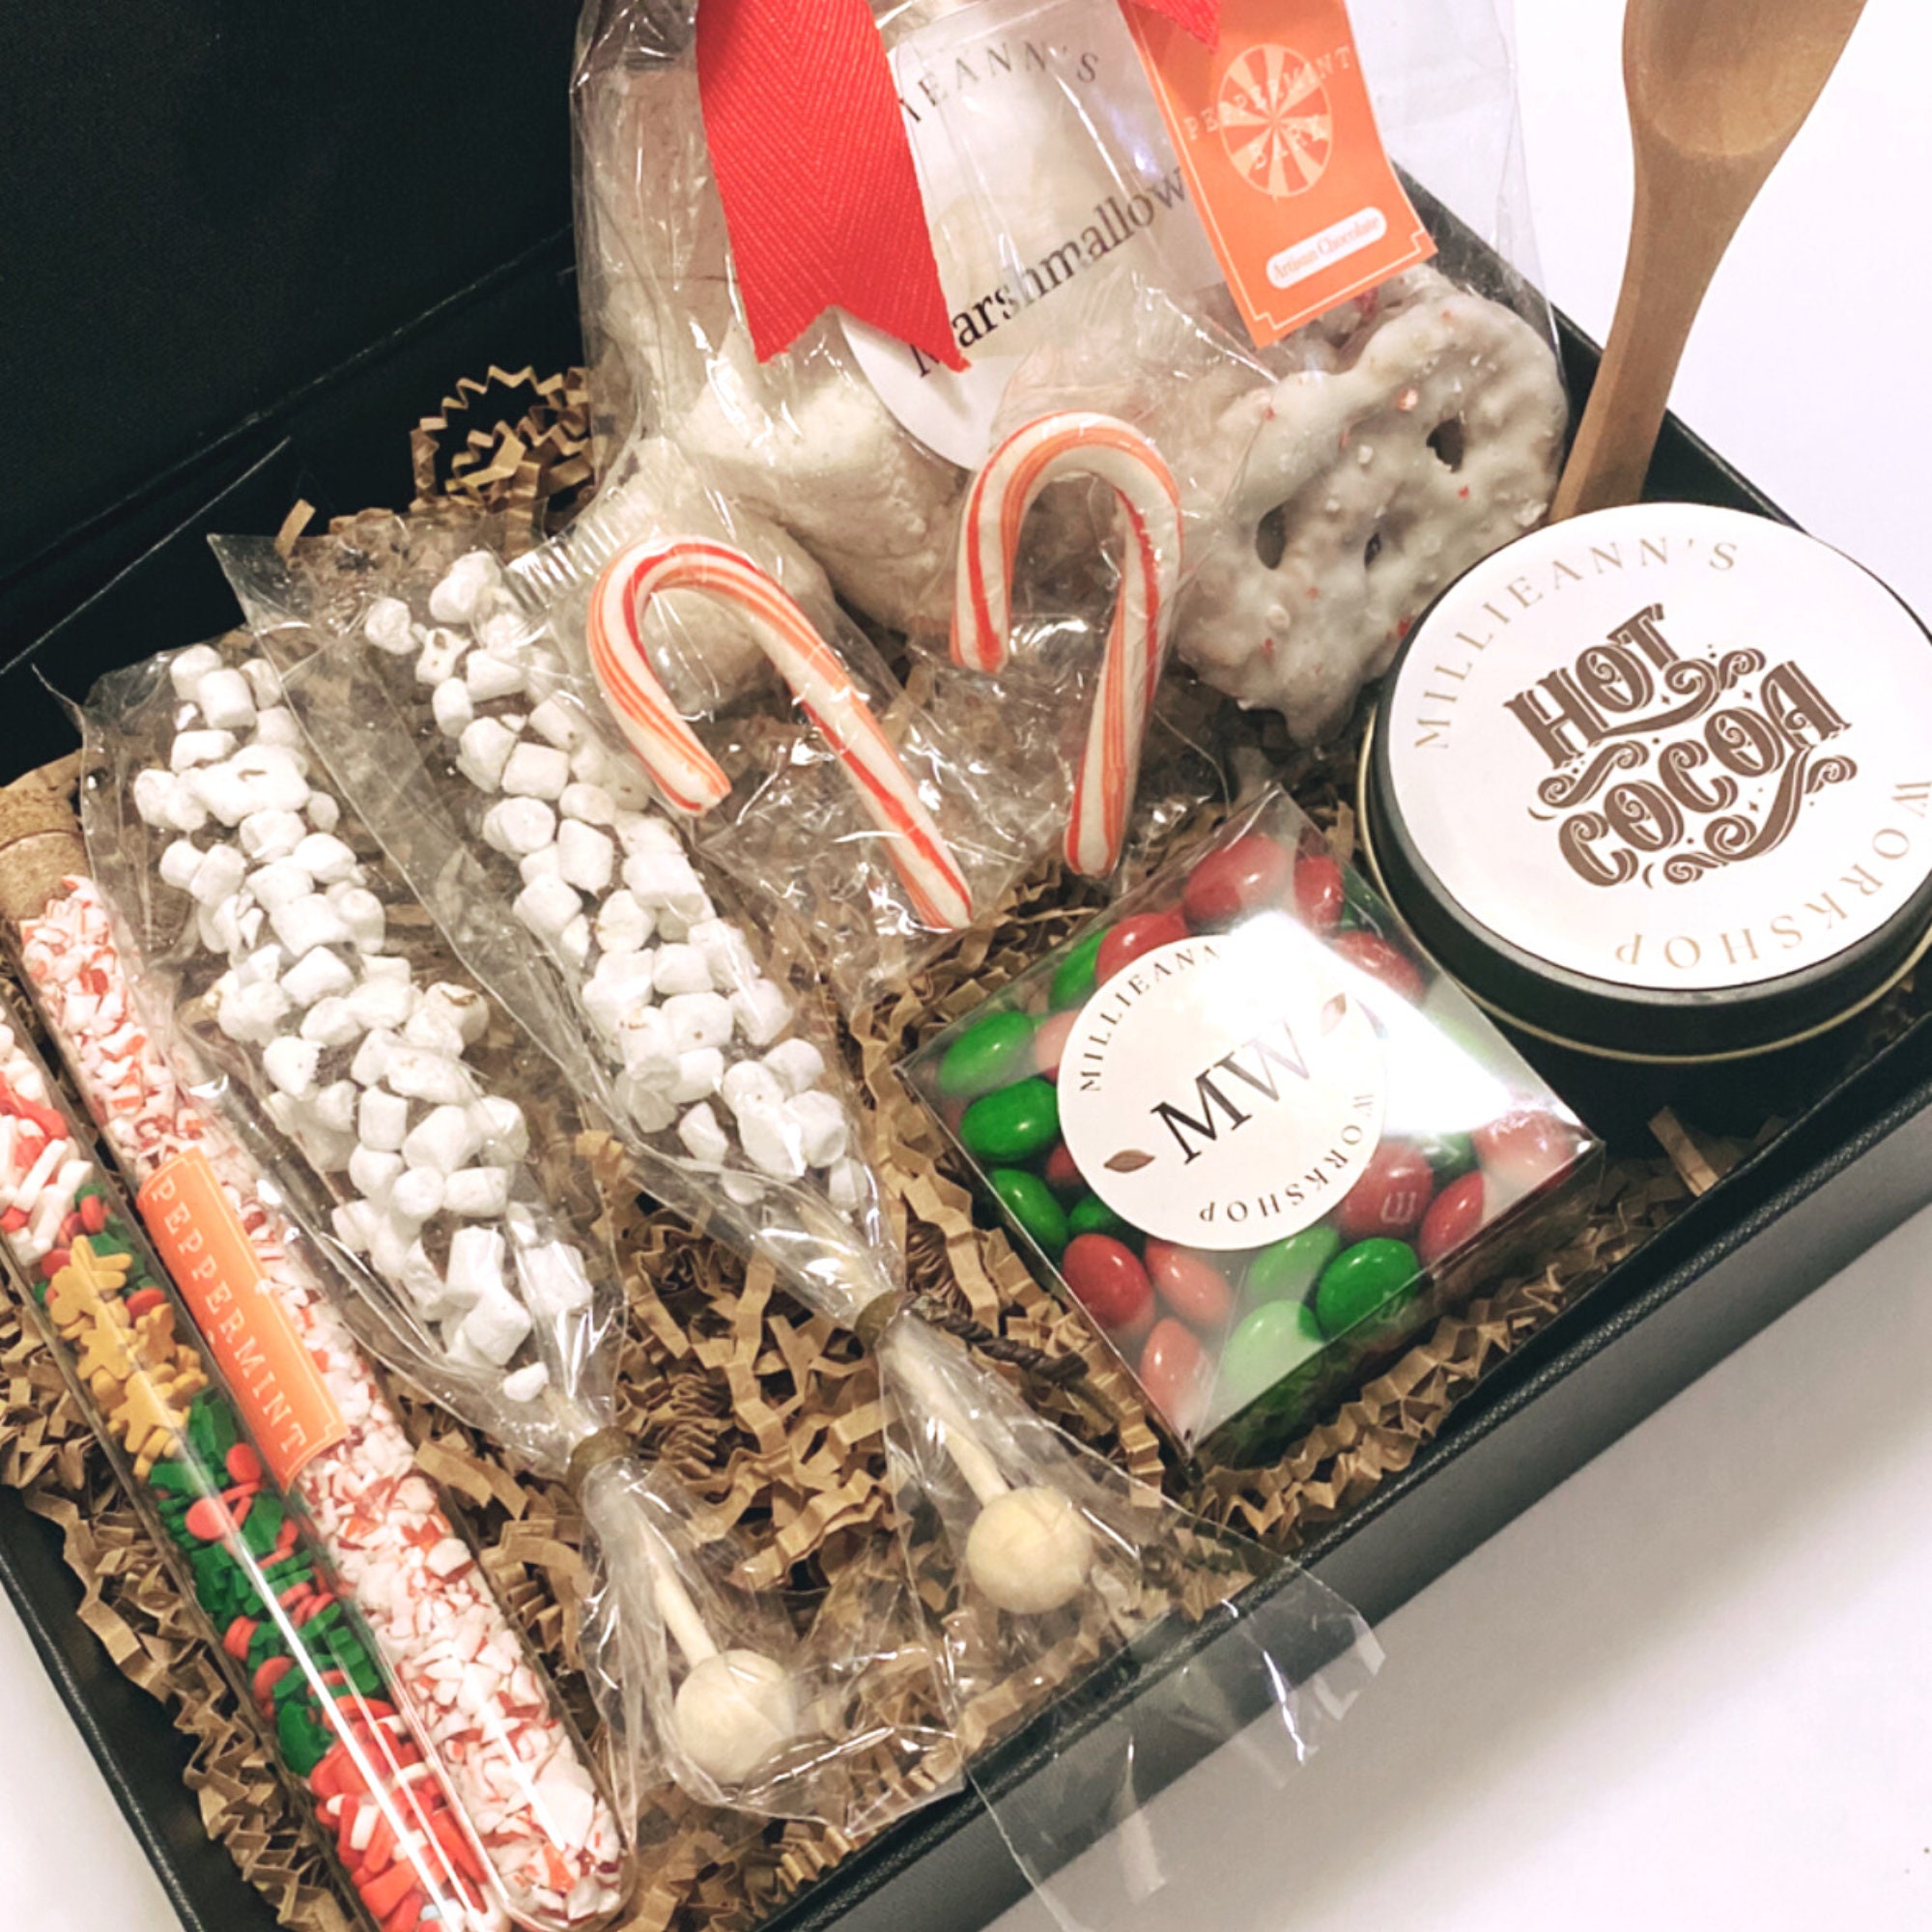 Coffee Gift Baskets - Hot Cocoa Gift - Food Gift - Valentines Coffee Gift  Box- 2 Mugs, Wafers, Hot Cocoa, Coffee, Snacks and More (Warm and Cozy)